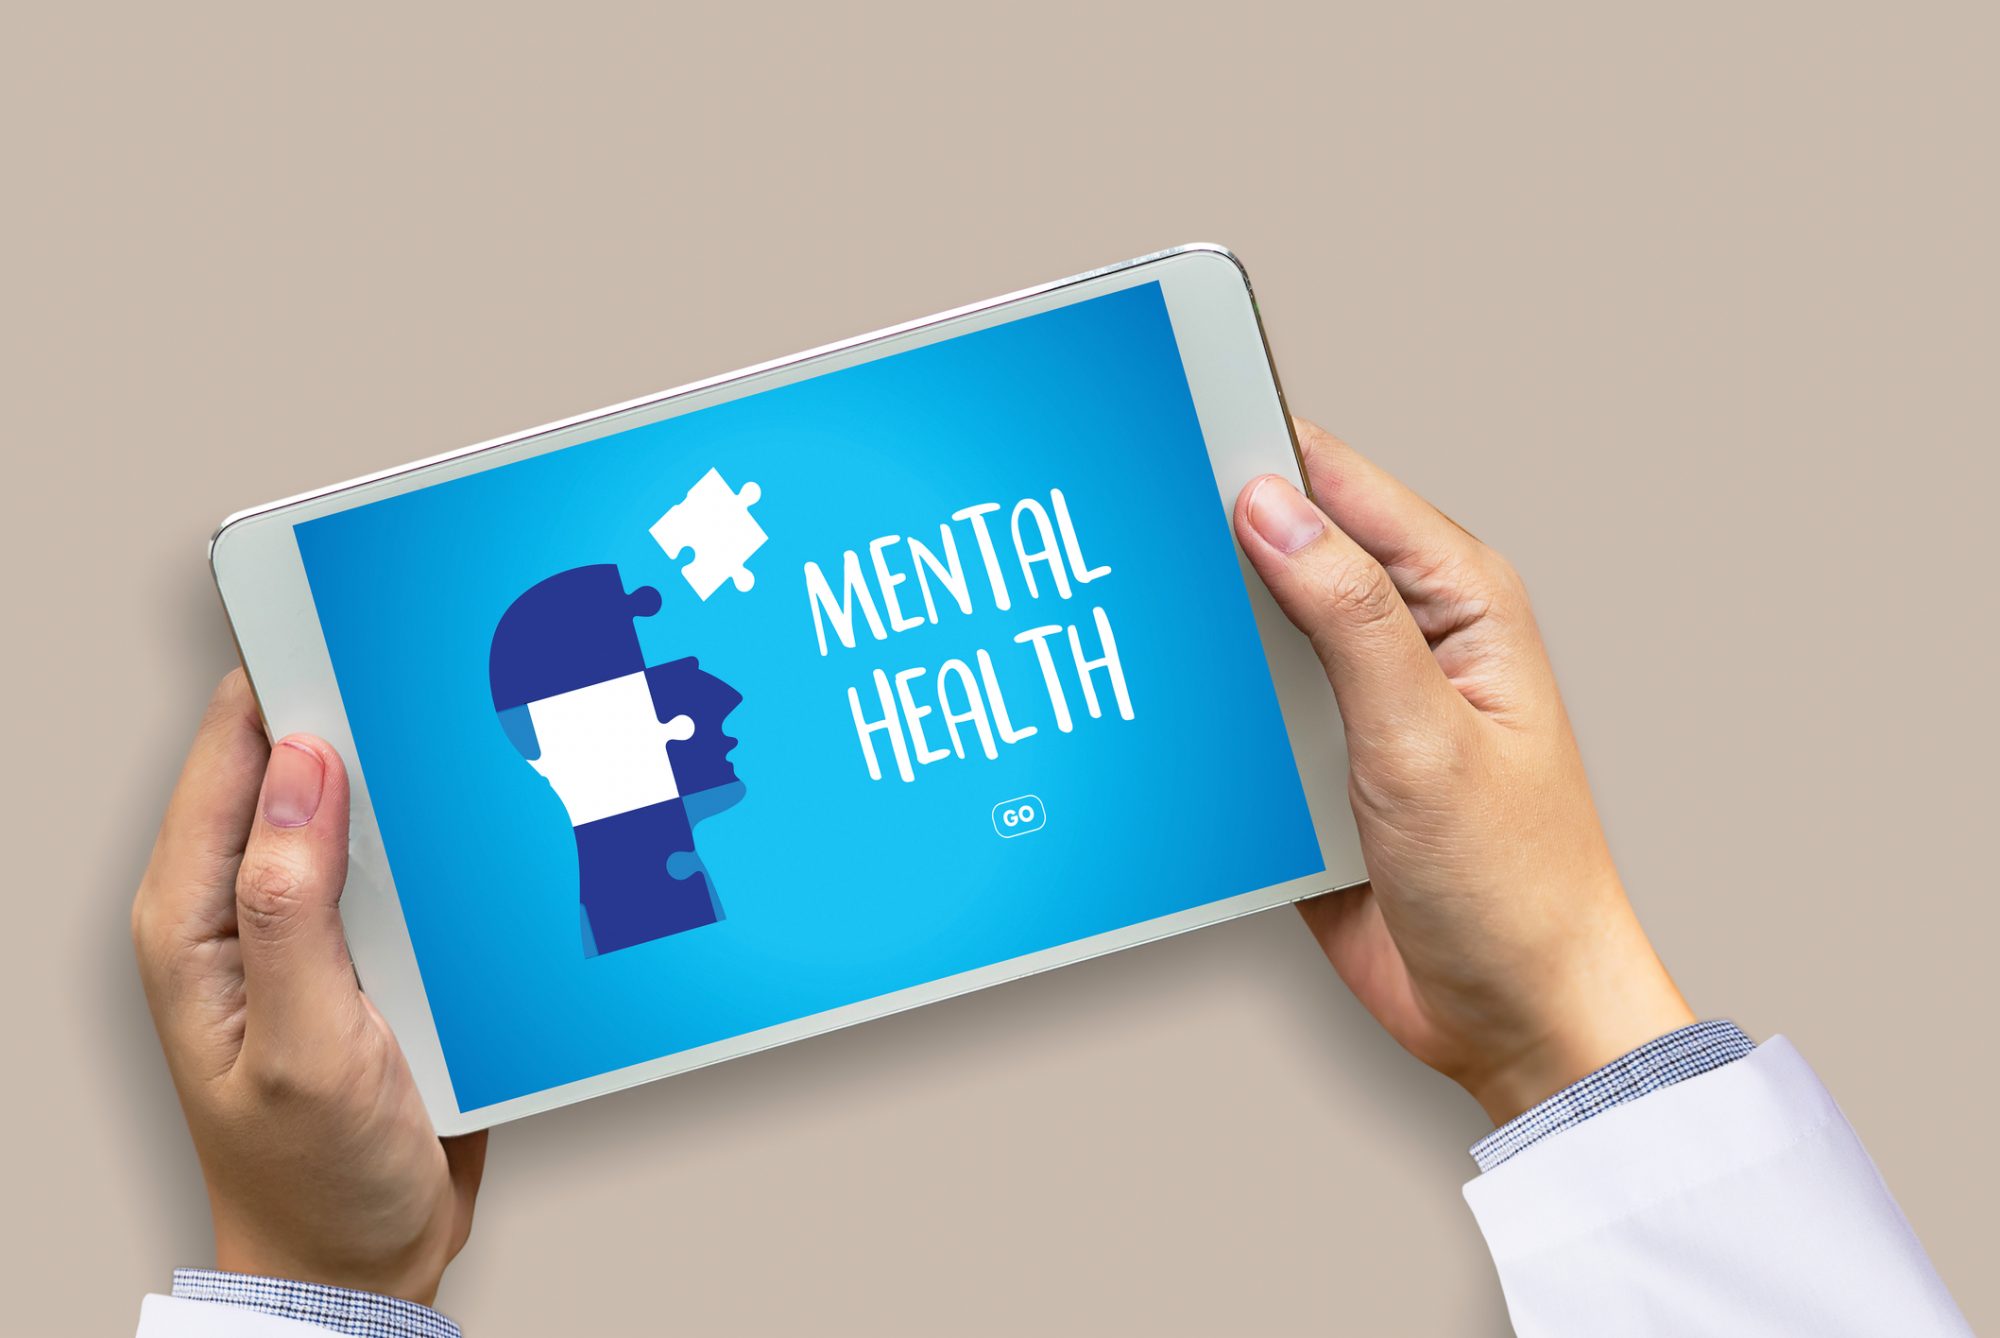 Treating Mental Health With Technology